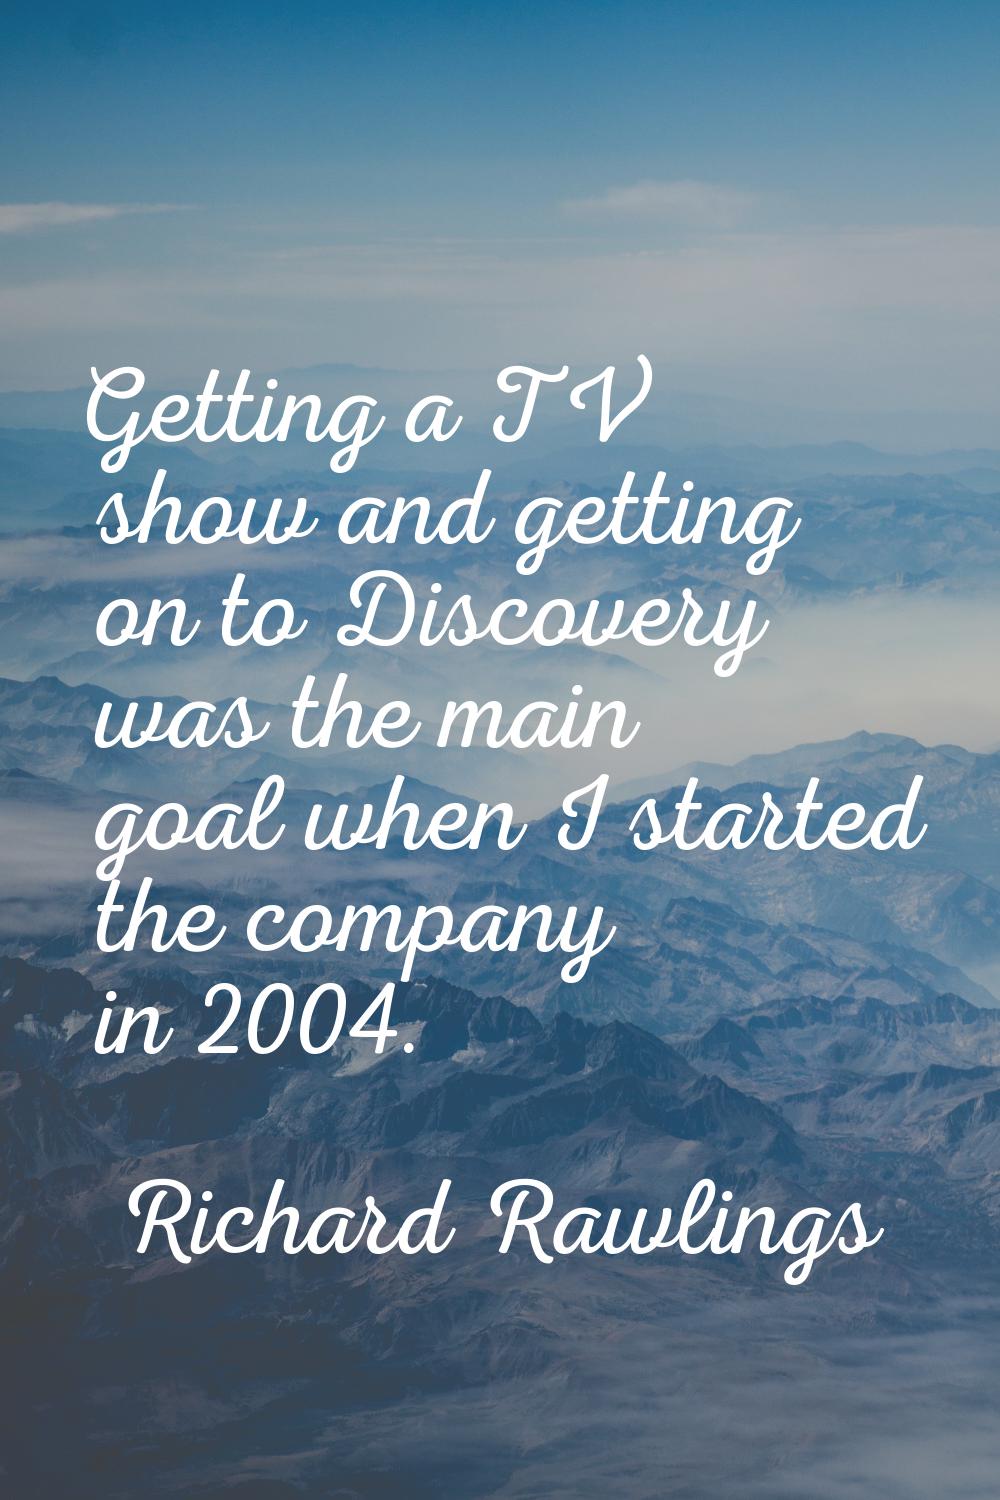 Getting a TV show and getting on to Discovery was the main goal when I started the company in 2004.